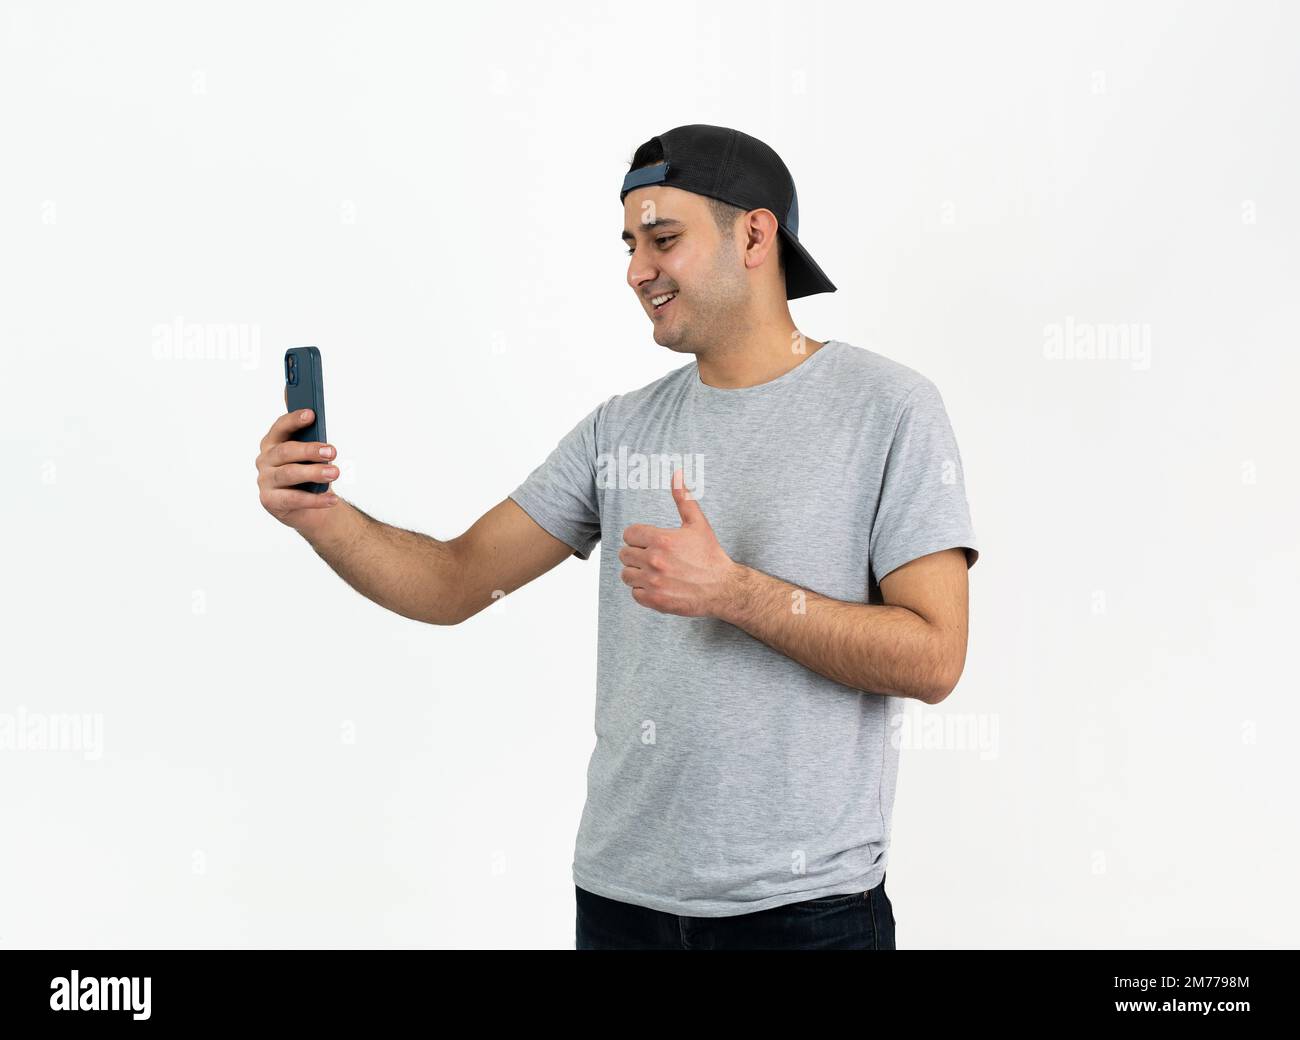 Close up photo of young boy wearing hat and using smartphone on isolated background. Stock Photo